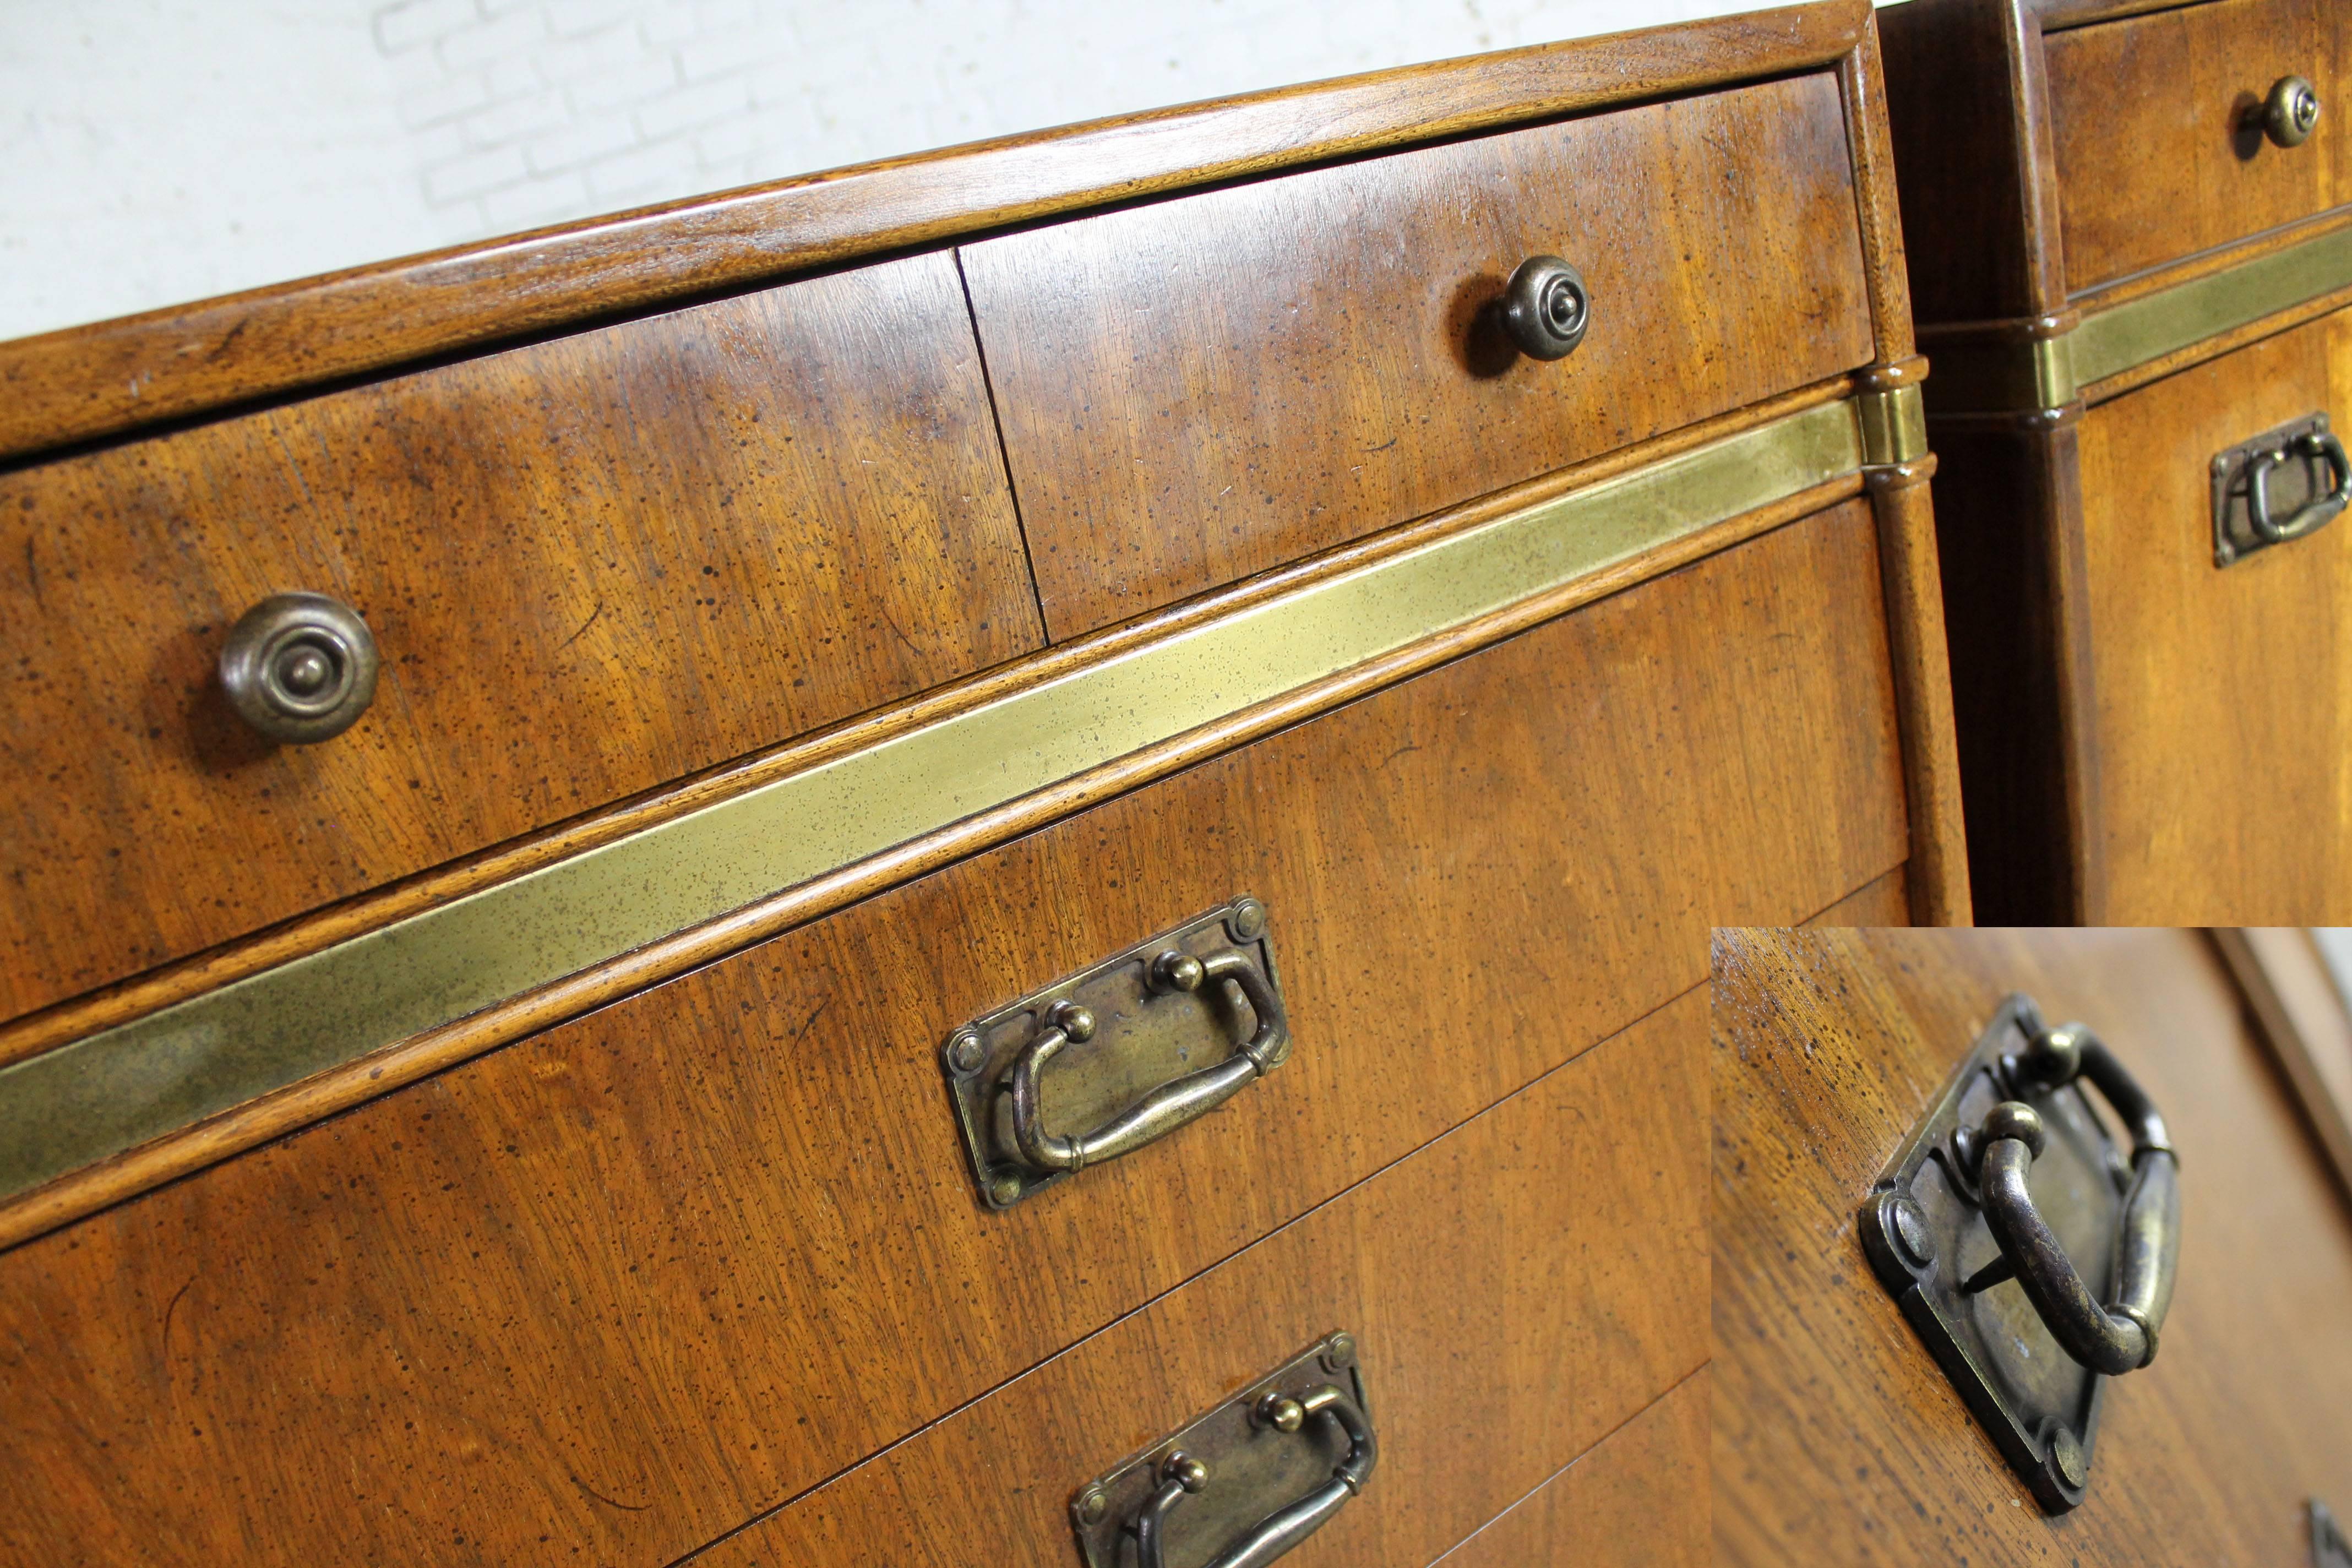 Fabulous pair of Campaign style chests by Hickory Manufacturing Co. with antiqued brass trim and hardware. The pair are in wonderful vintage, circa 1970s condition. 

Looking for a pair of outstanding bedside chests? Look no further. These